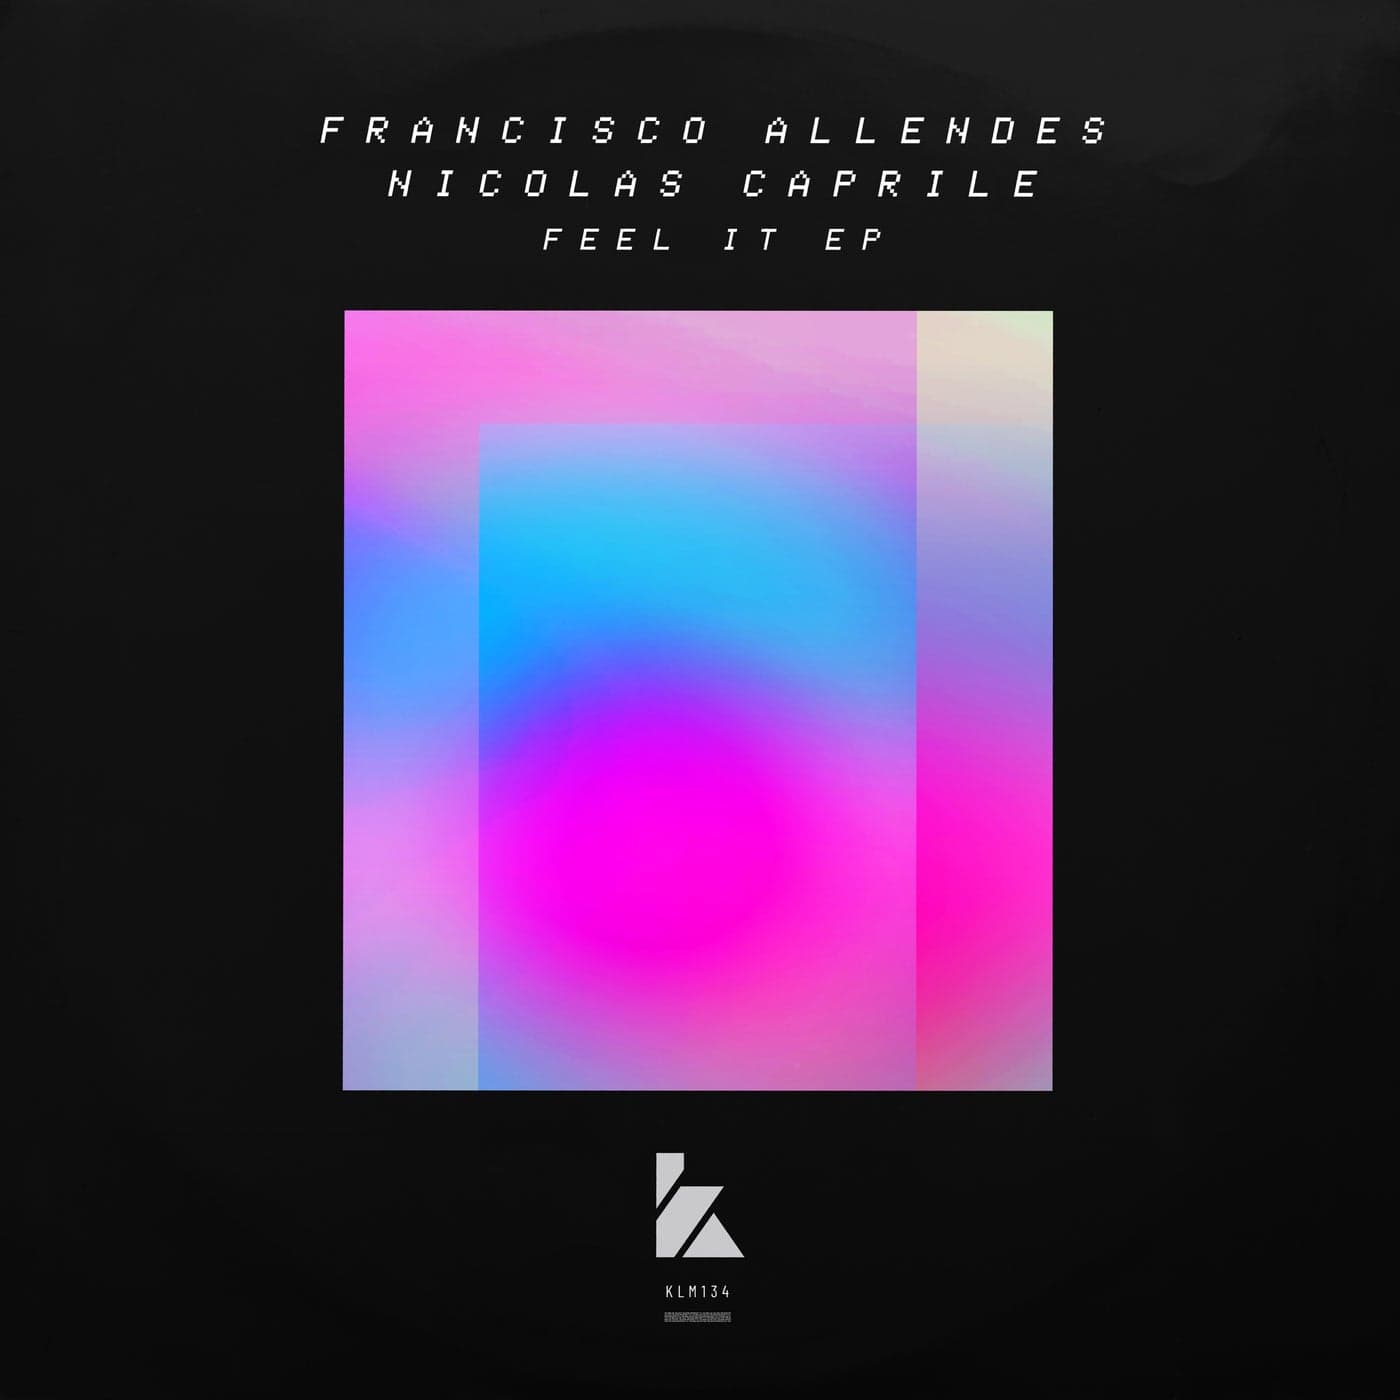 Download Francisco Allendes, Nicolas Caprile - Feel It EP on Electrobuzz